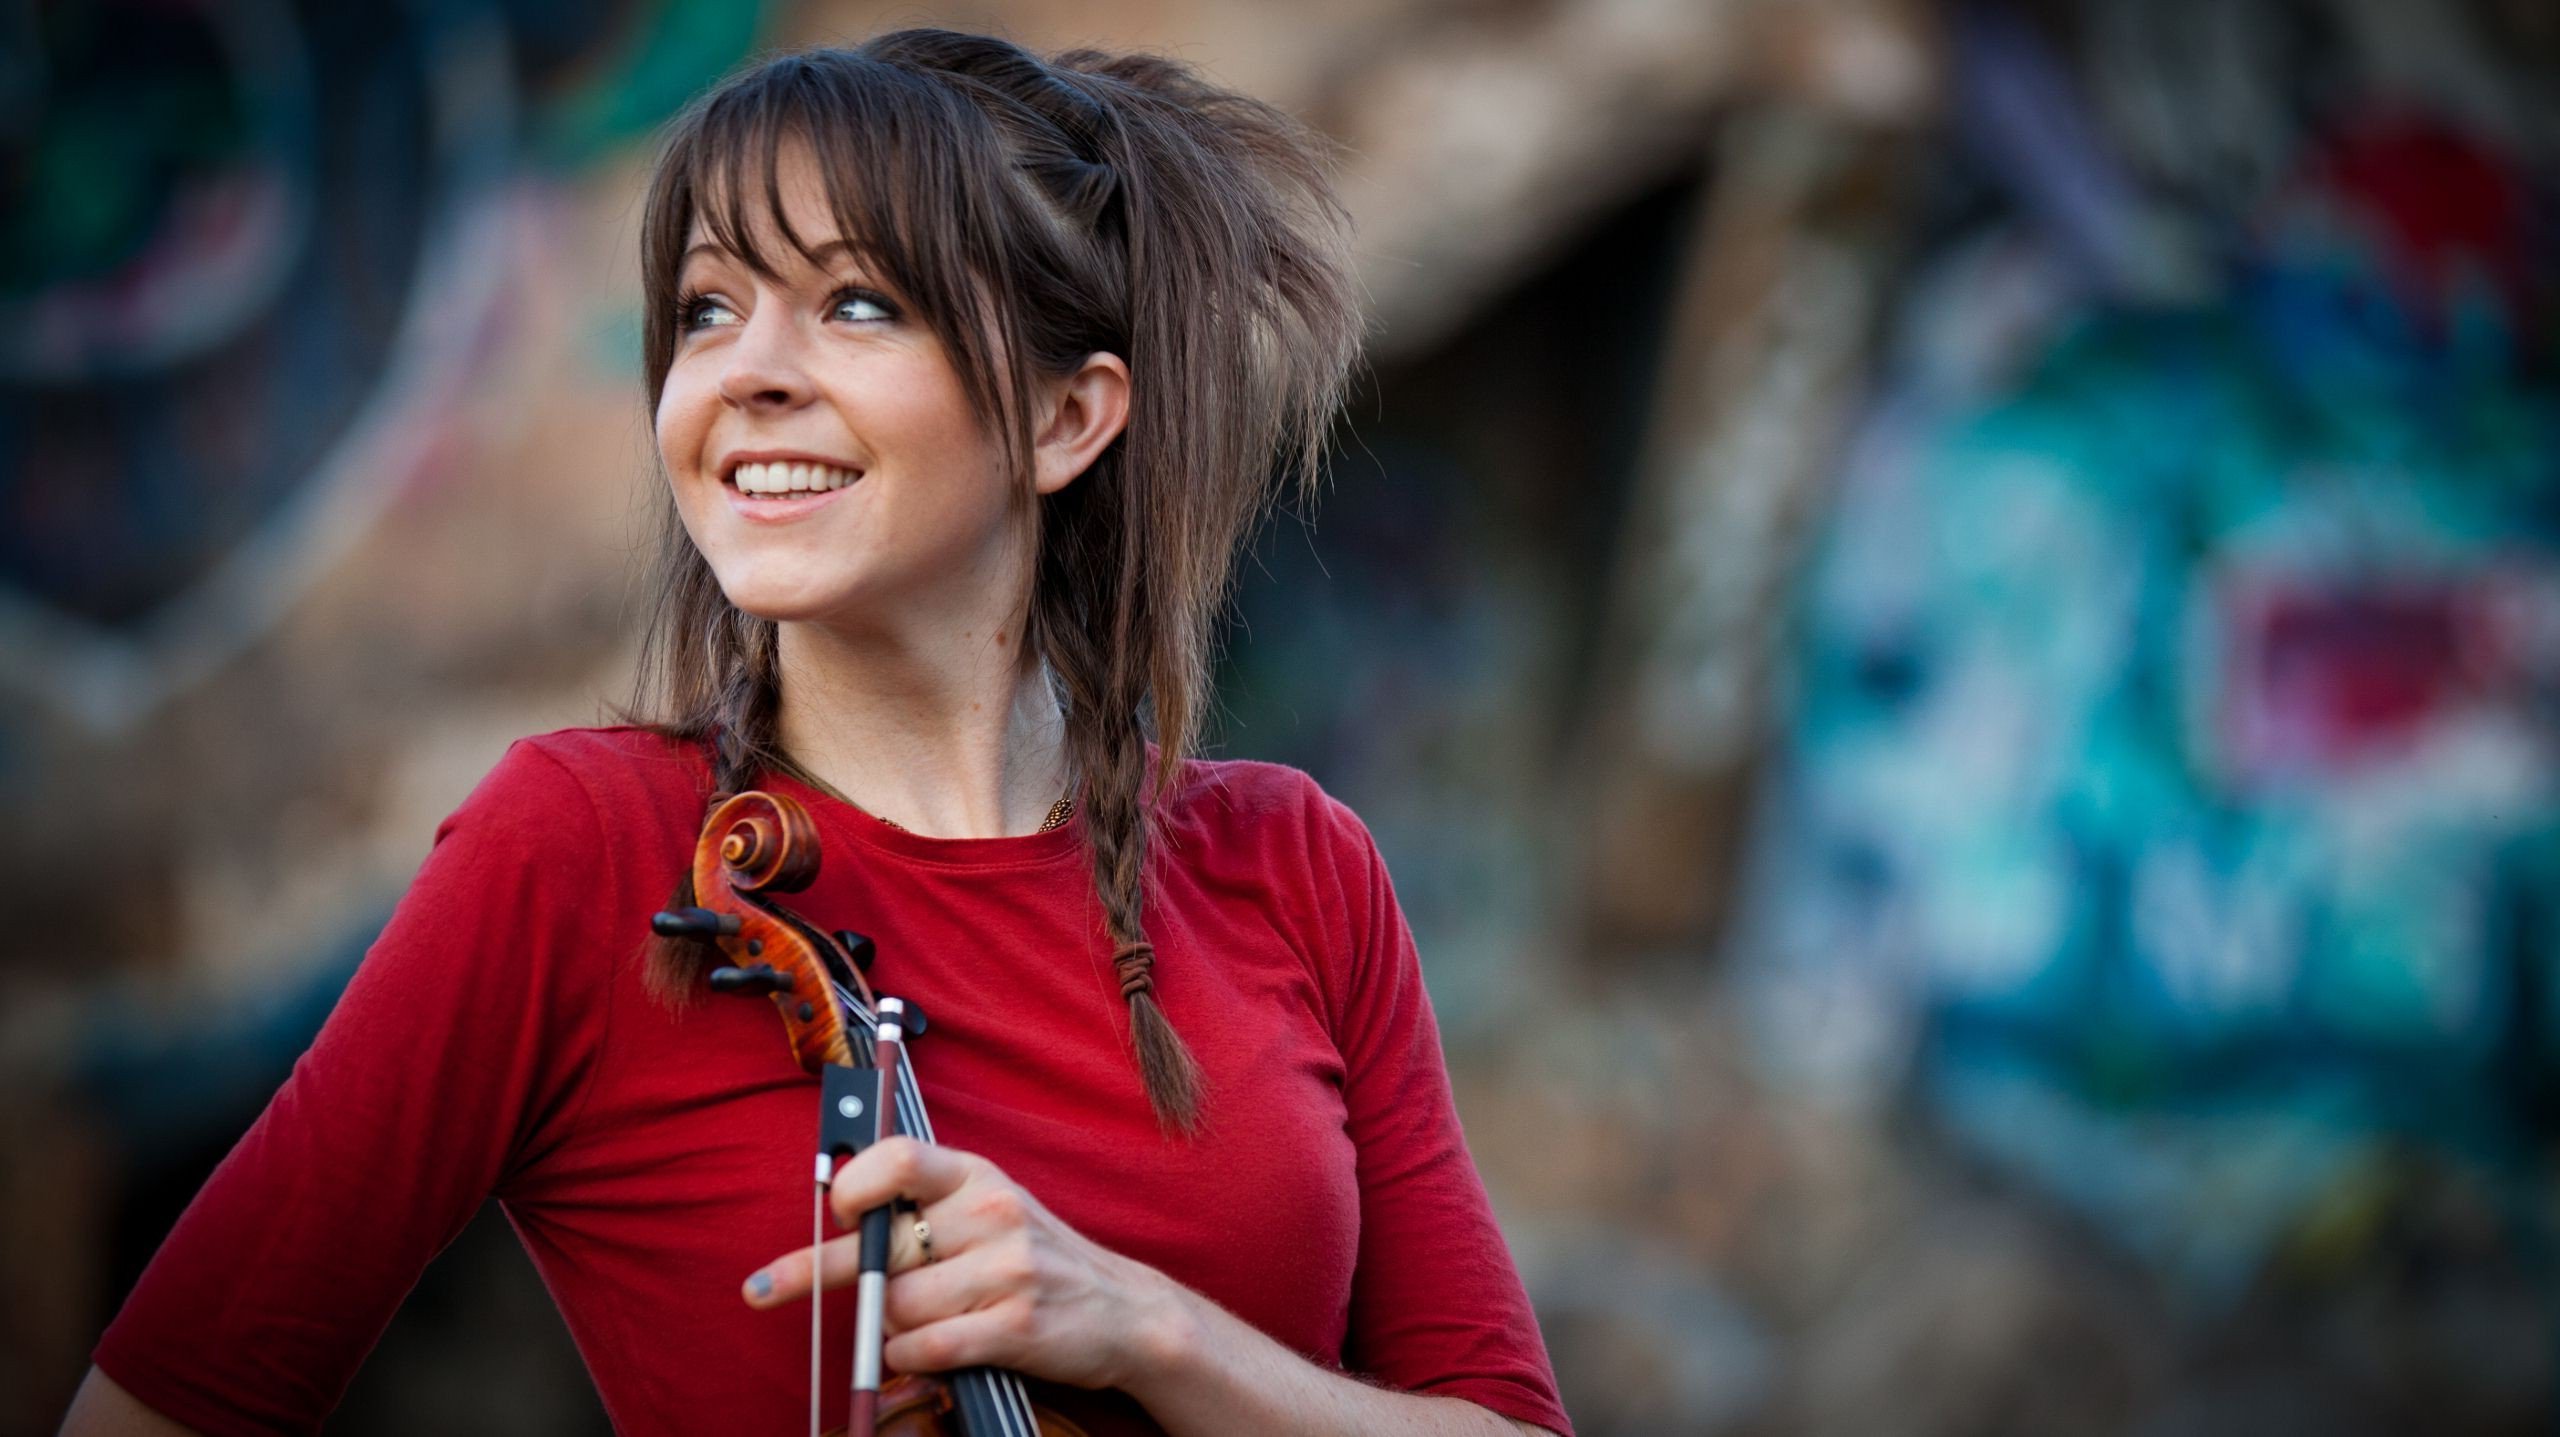 Free photo Lindsey Stirling with a smile on her face